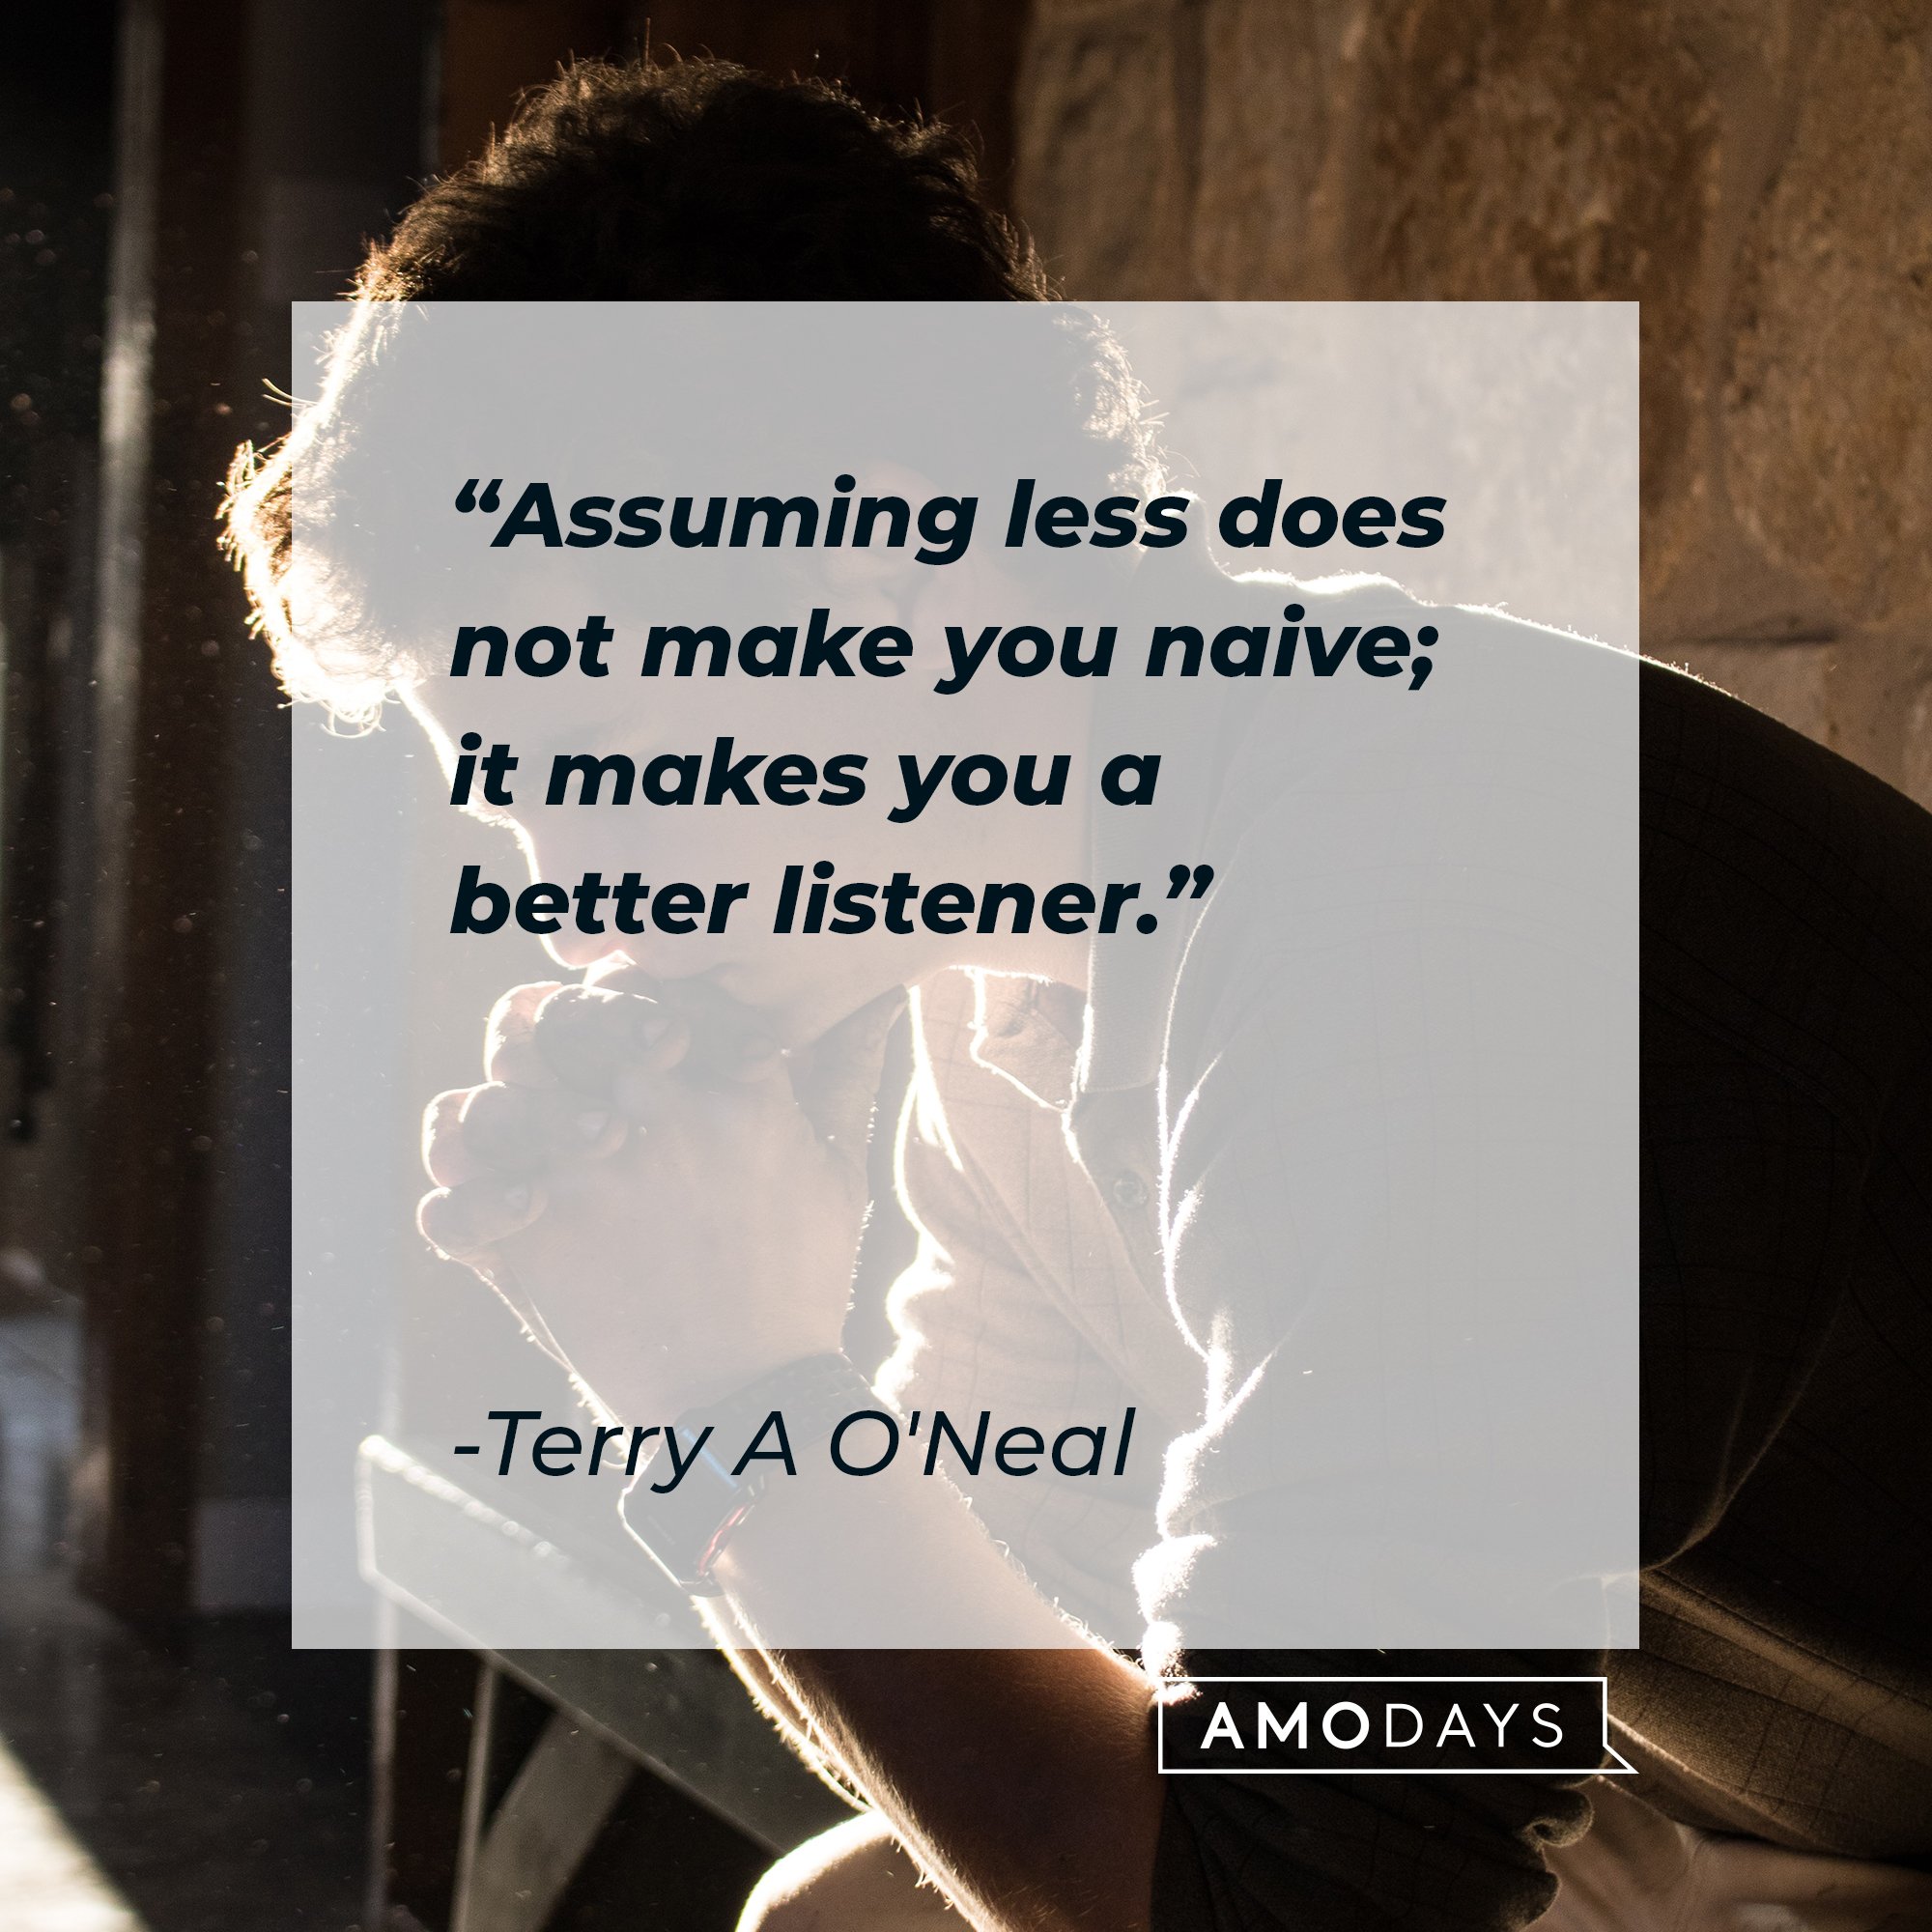 Terry A O'Neal’s quote: "Assuming less does not make you naive; it makes you a better listener."  | Image: AmoDays 